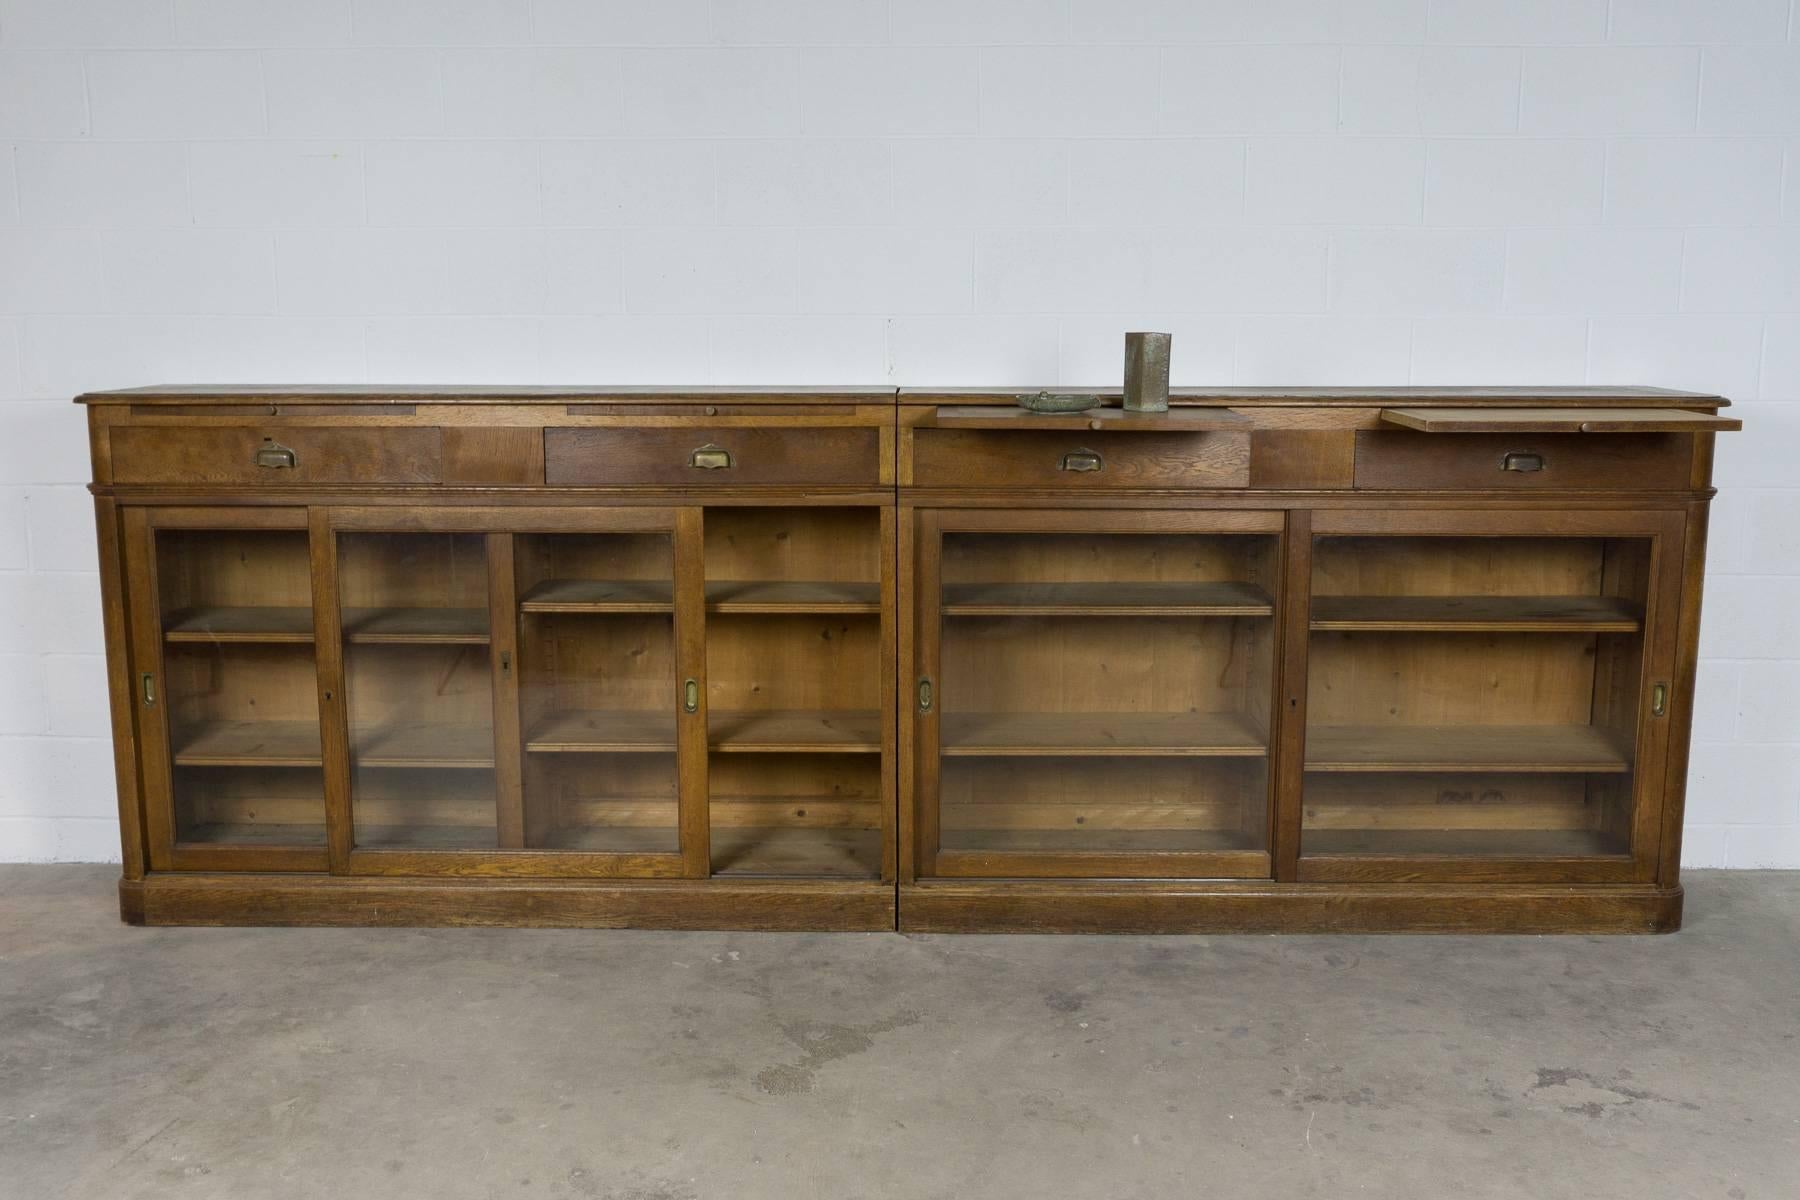 French apothecary cabinet in oak. Sliding glass doors, with drawers and pull-out shelves. Two pieces with adjustable shelving.